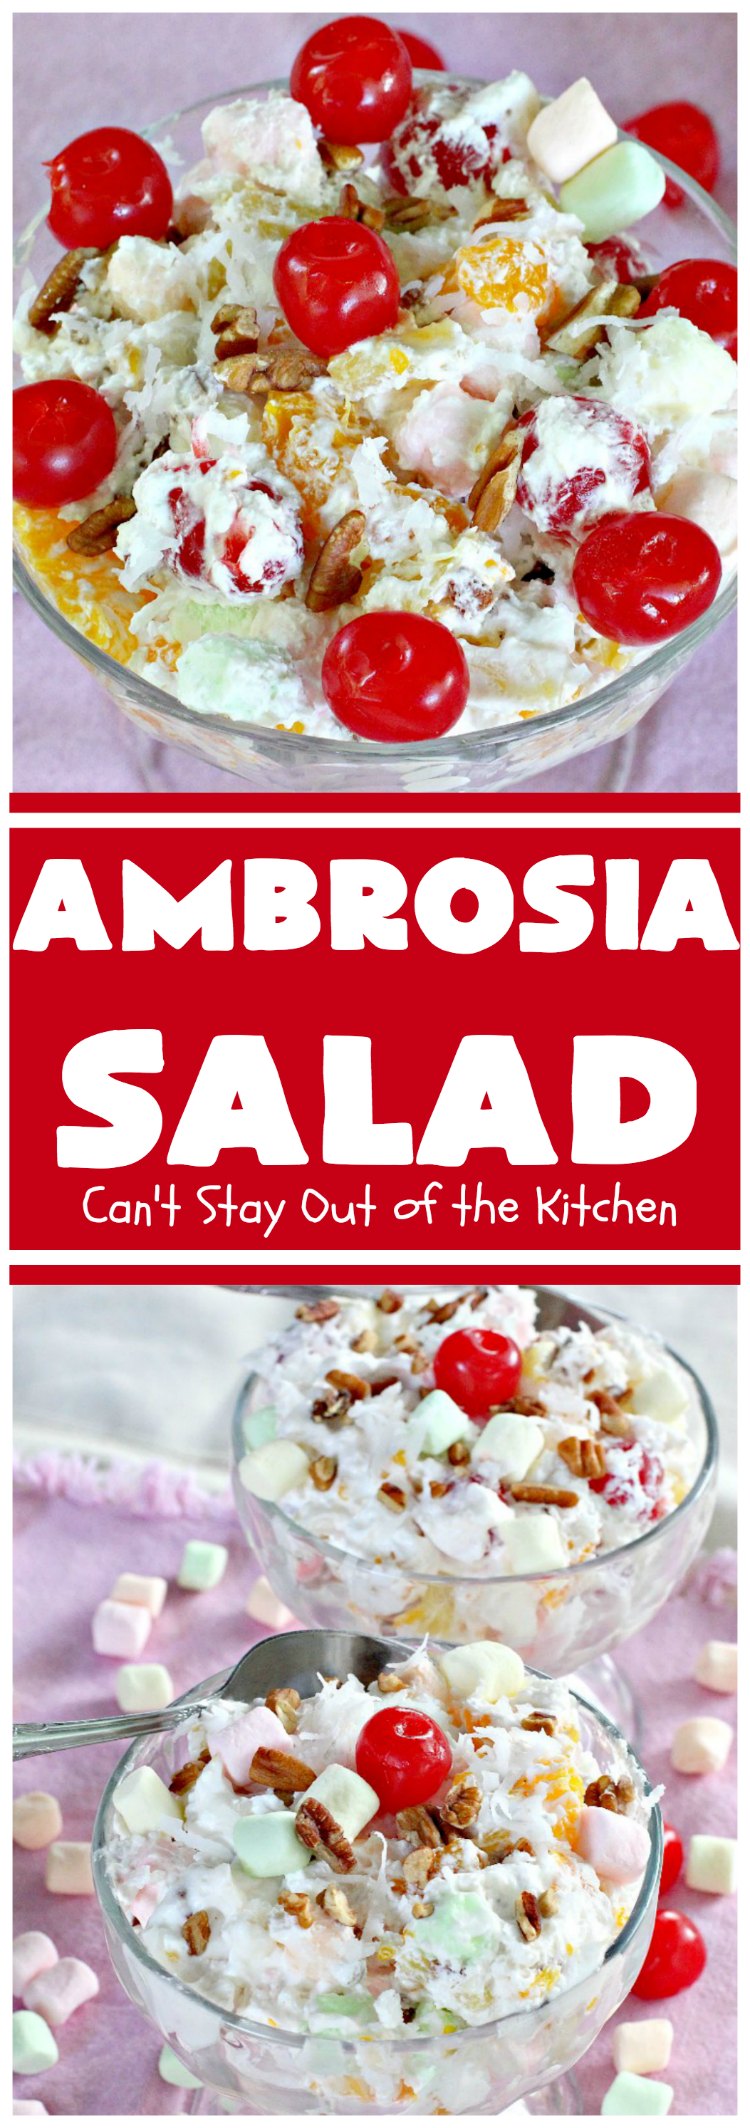 Ambrosia Salad | Can't Stay Out of the Kitchen